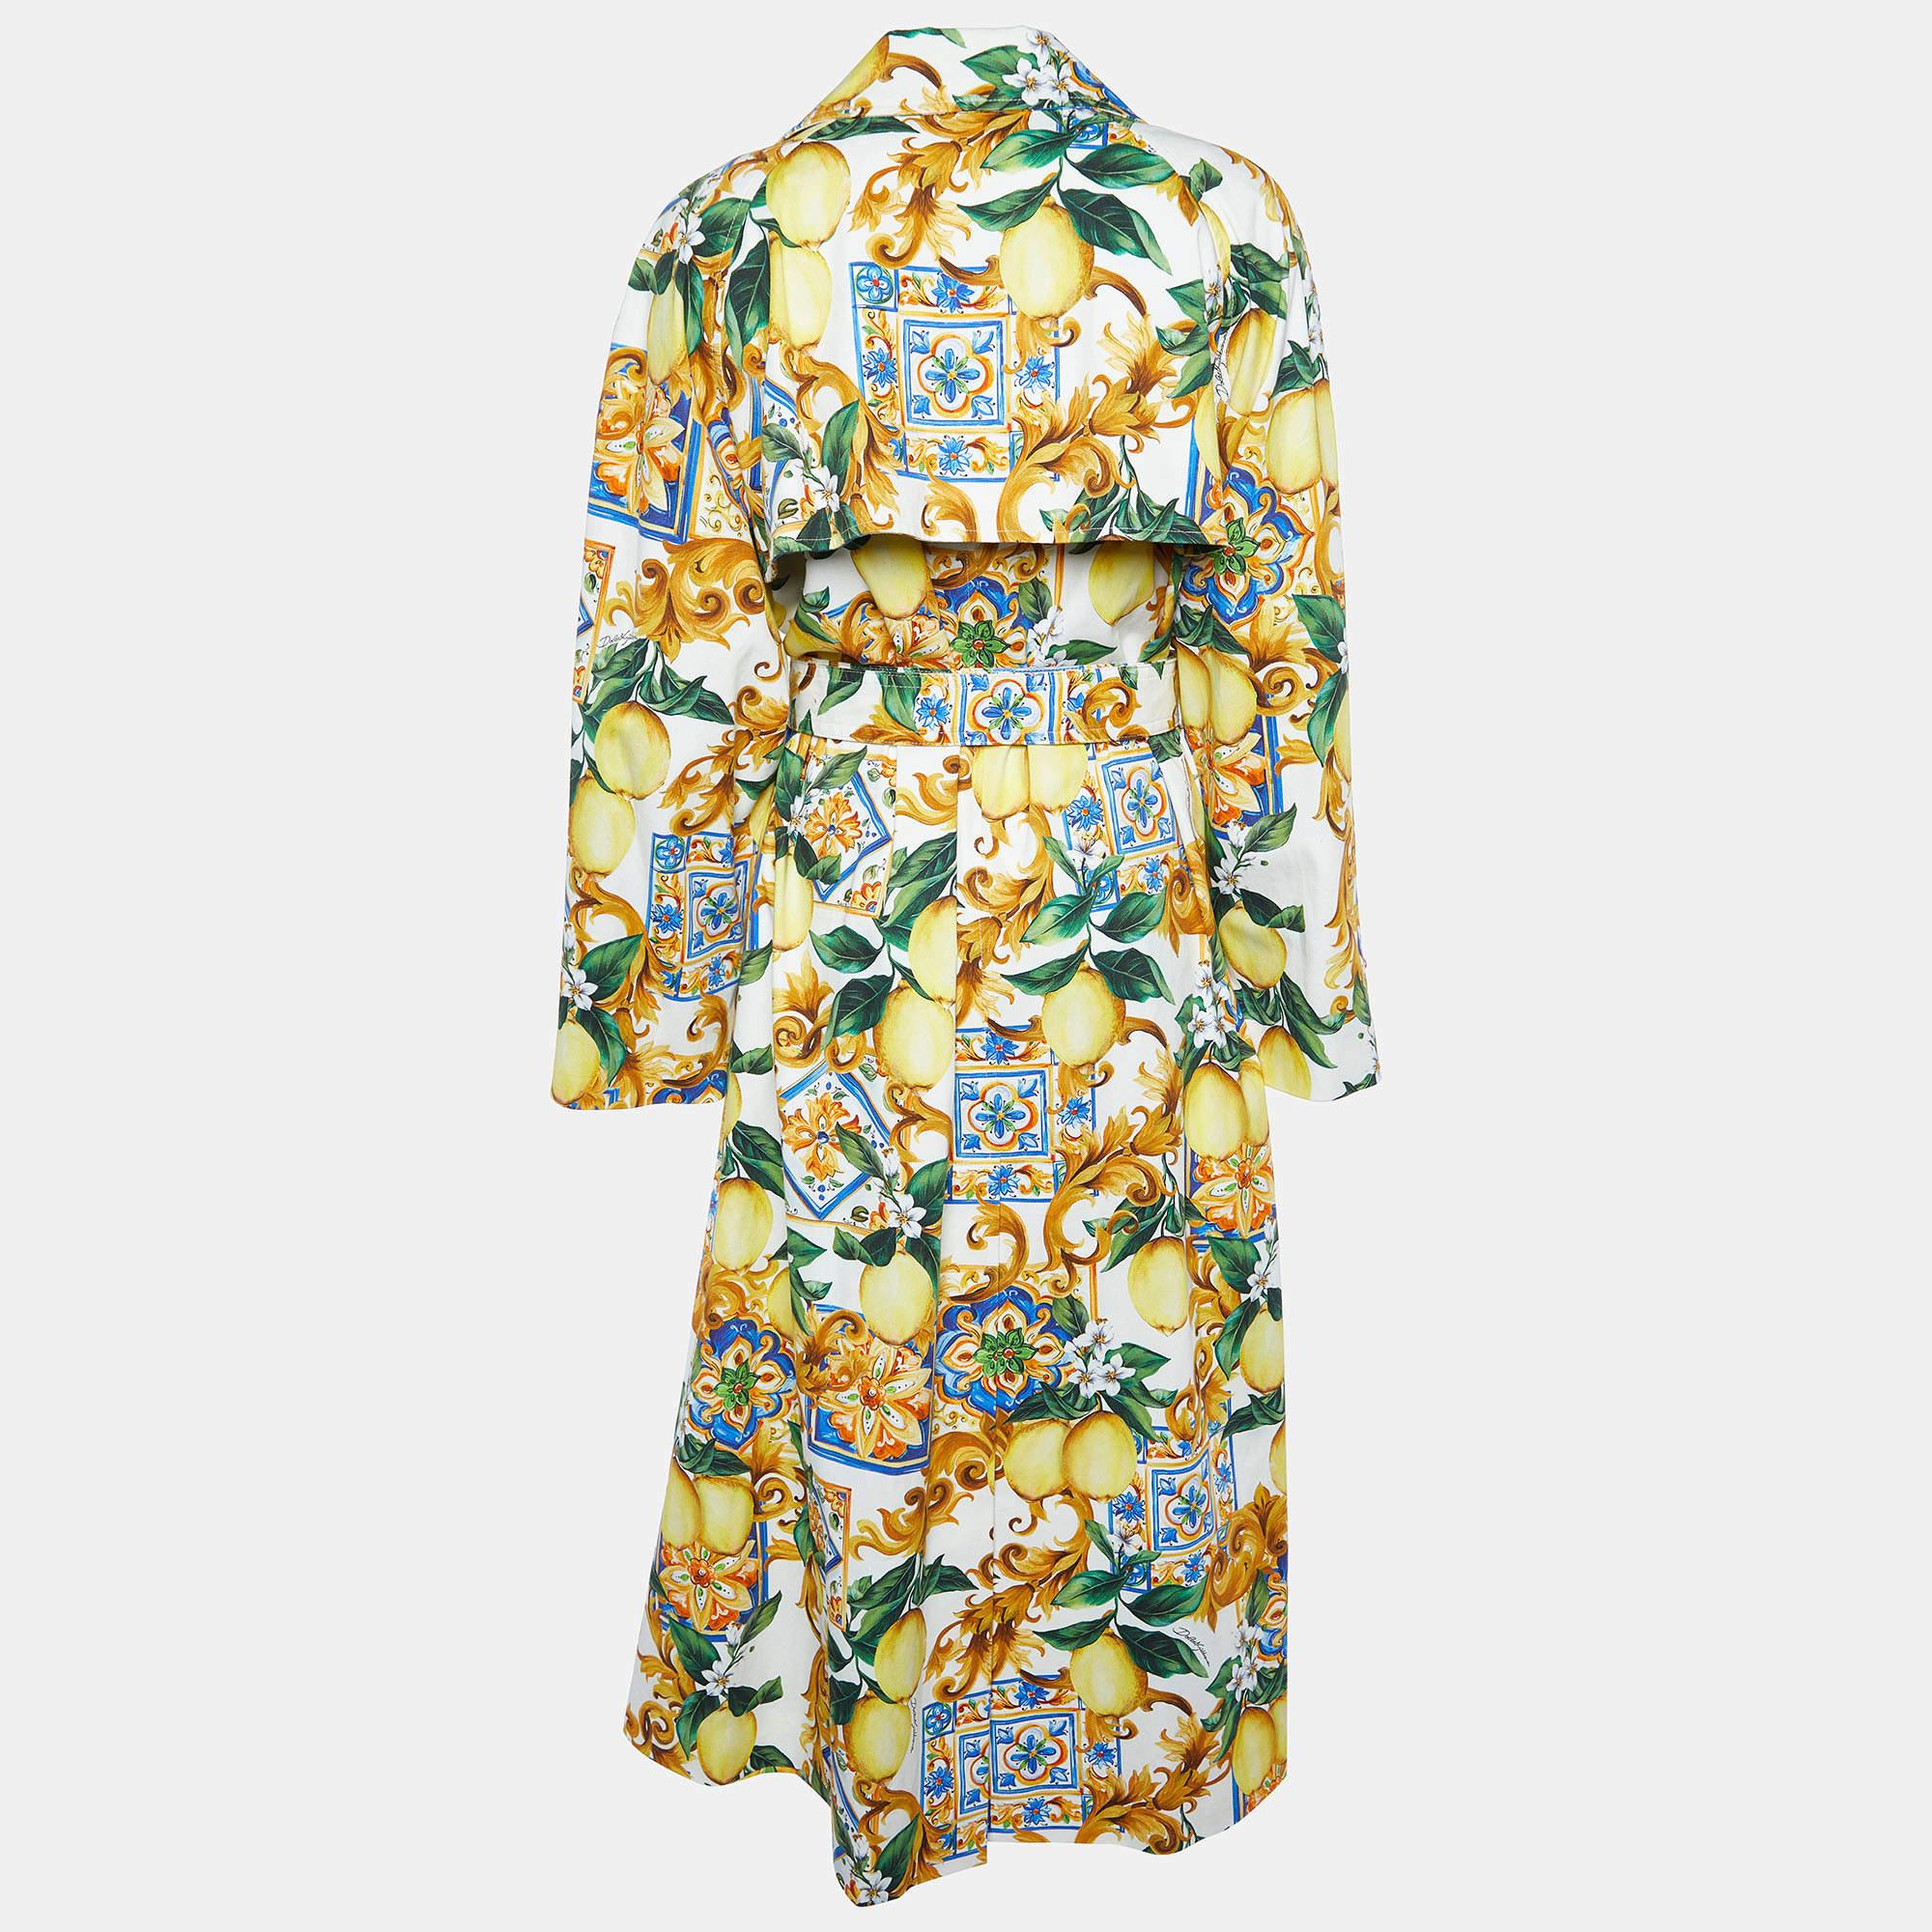 We can't stop gushing over this stunner of a coat from Dolce & Gabbana. It flaunts such exquisite details, like the Limoni print in multiple hues and the button fastenings on the front. It has been made from a quality blend of fabrics with a fabric